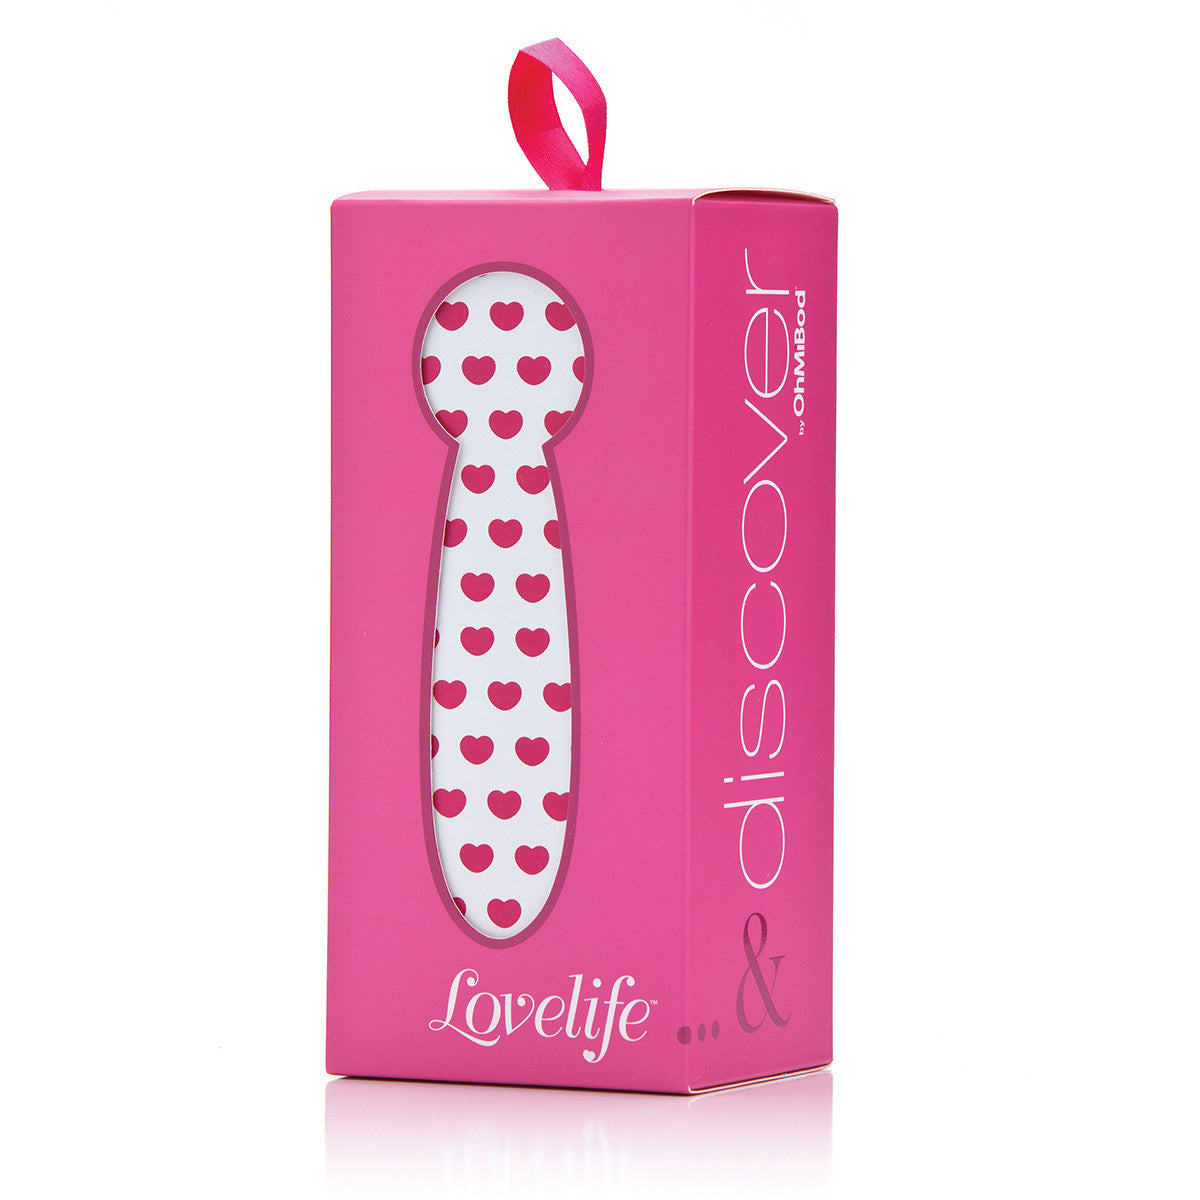 Lovelife Discover Intimate Massager